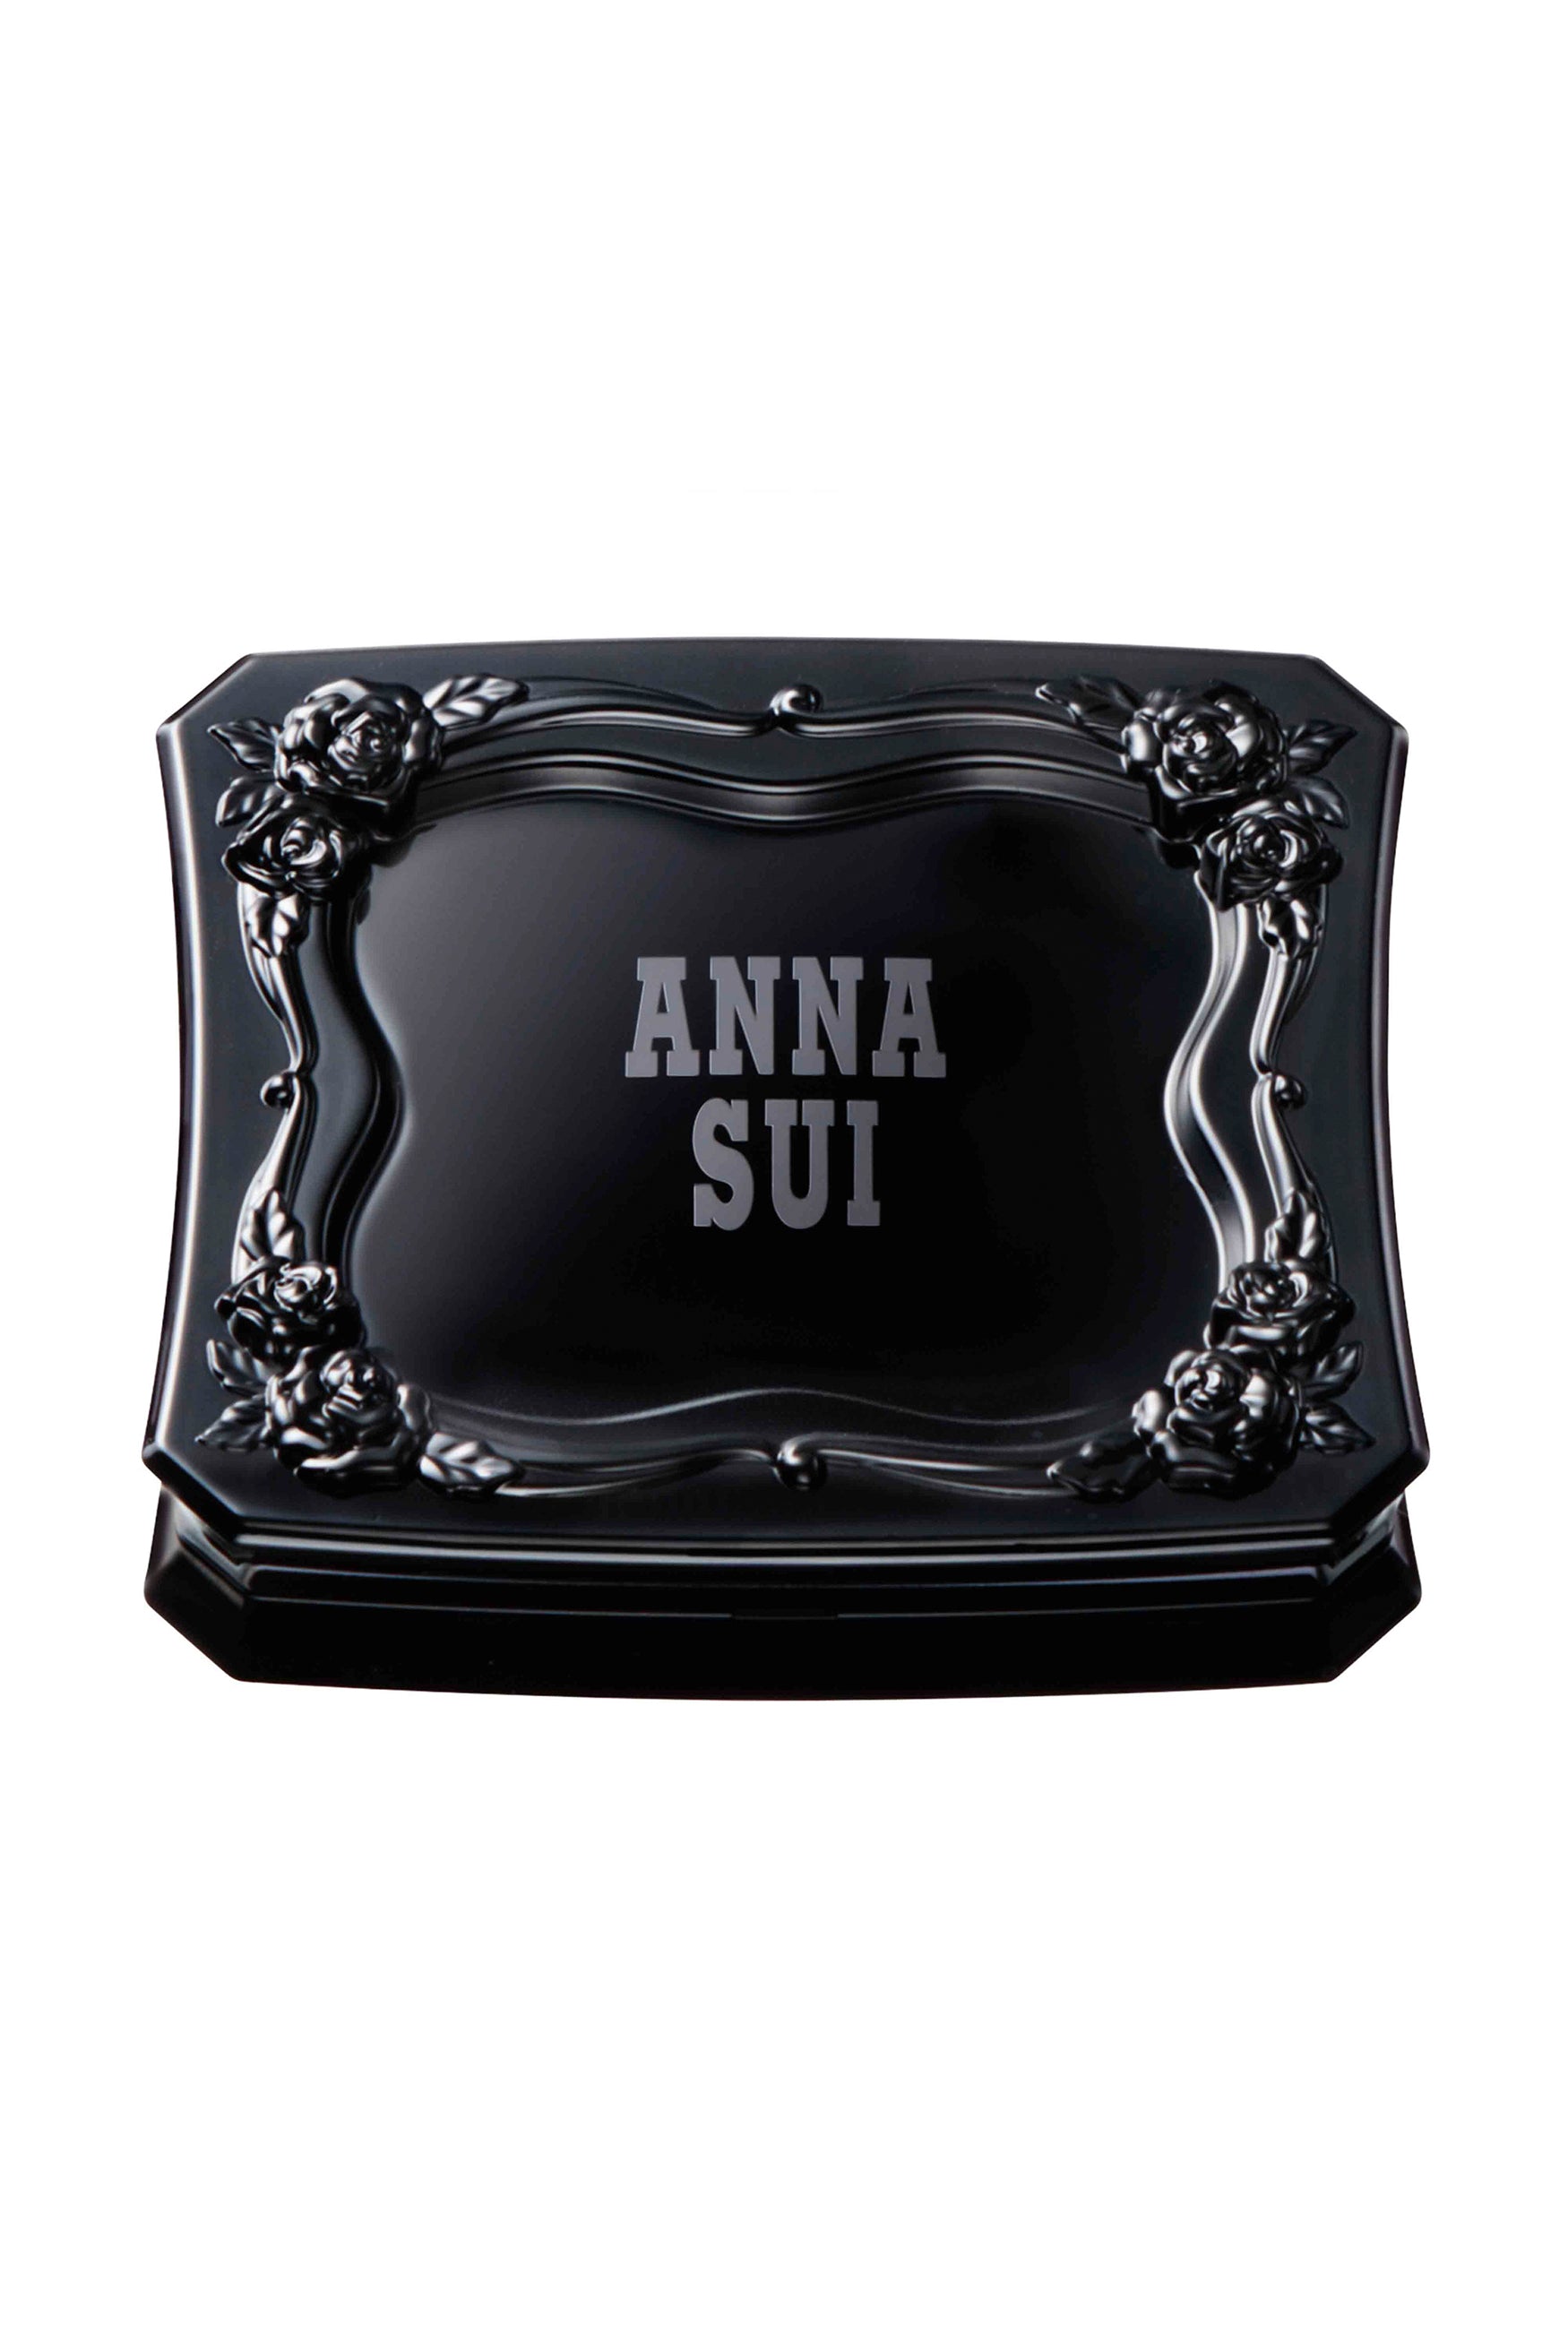 Black squared container and a roses pattern around the top lid, Anna Sui label in the middle